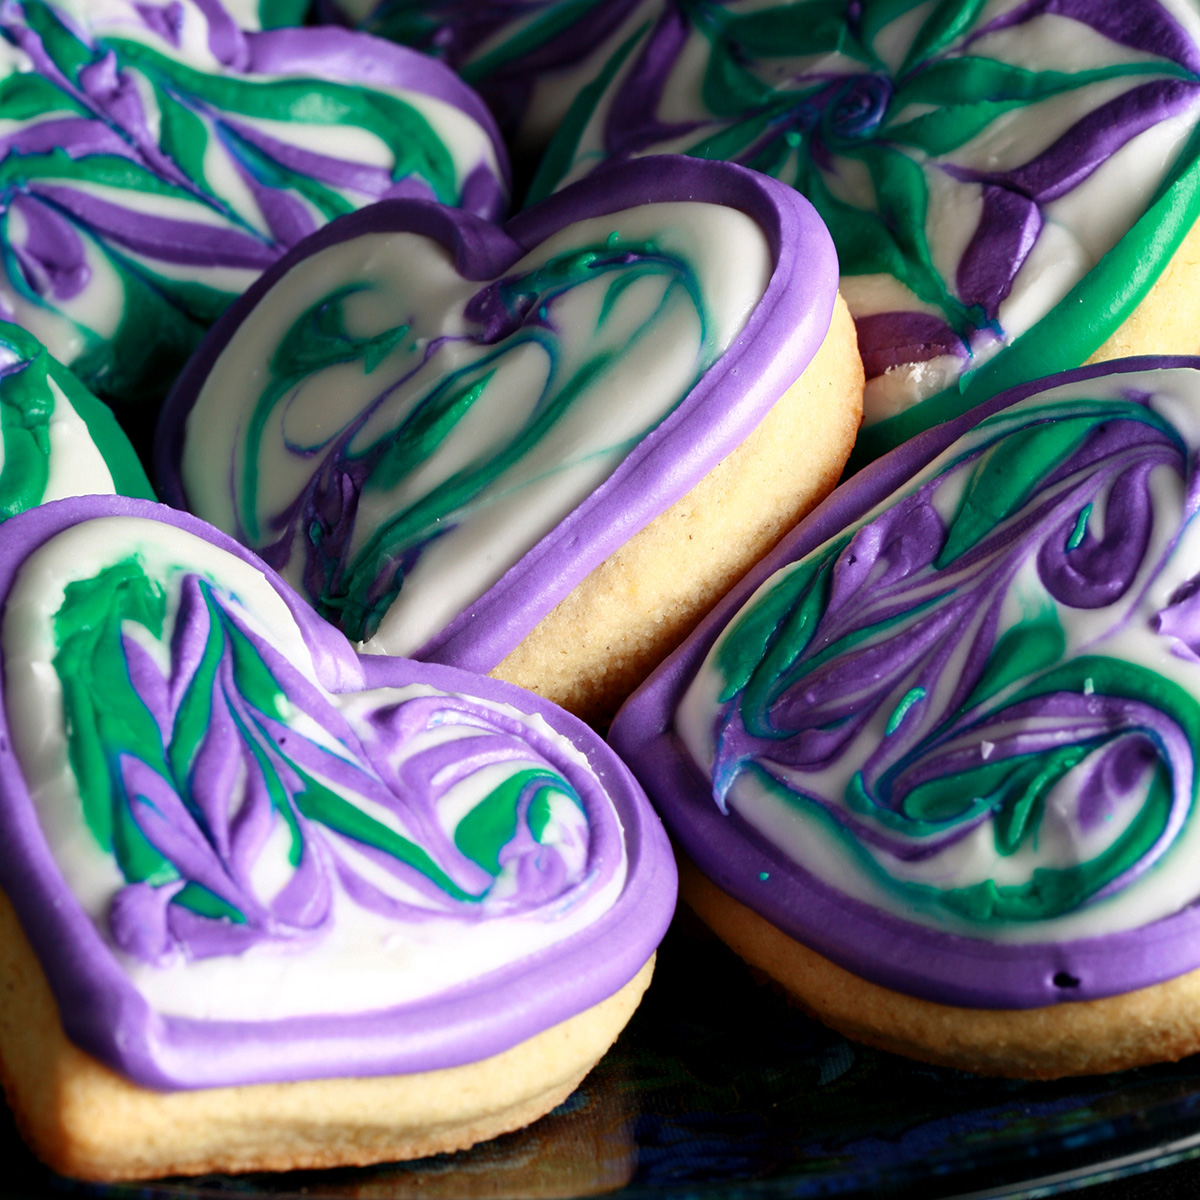 Close up view of a plate of heart shaped gluten-free sugar cookies. They are decorated with swirls of teal and lavender over a base of white frosting